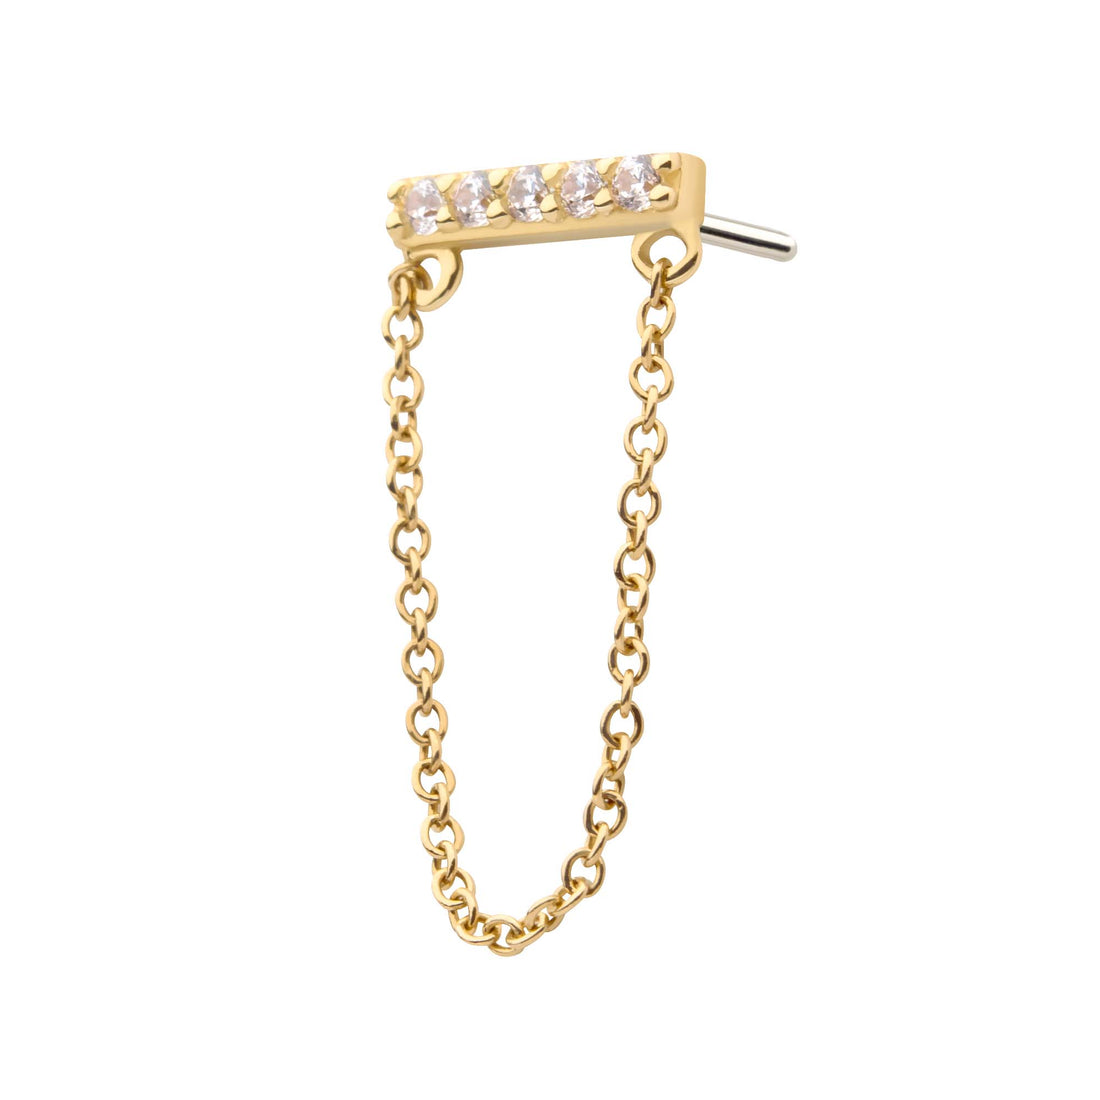 14kt Yellow Gold Threadless 5-Prong Set CZ Bar Top with Dangling Chain